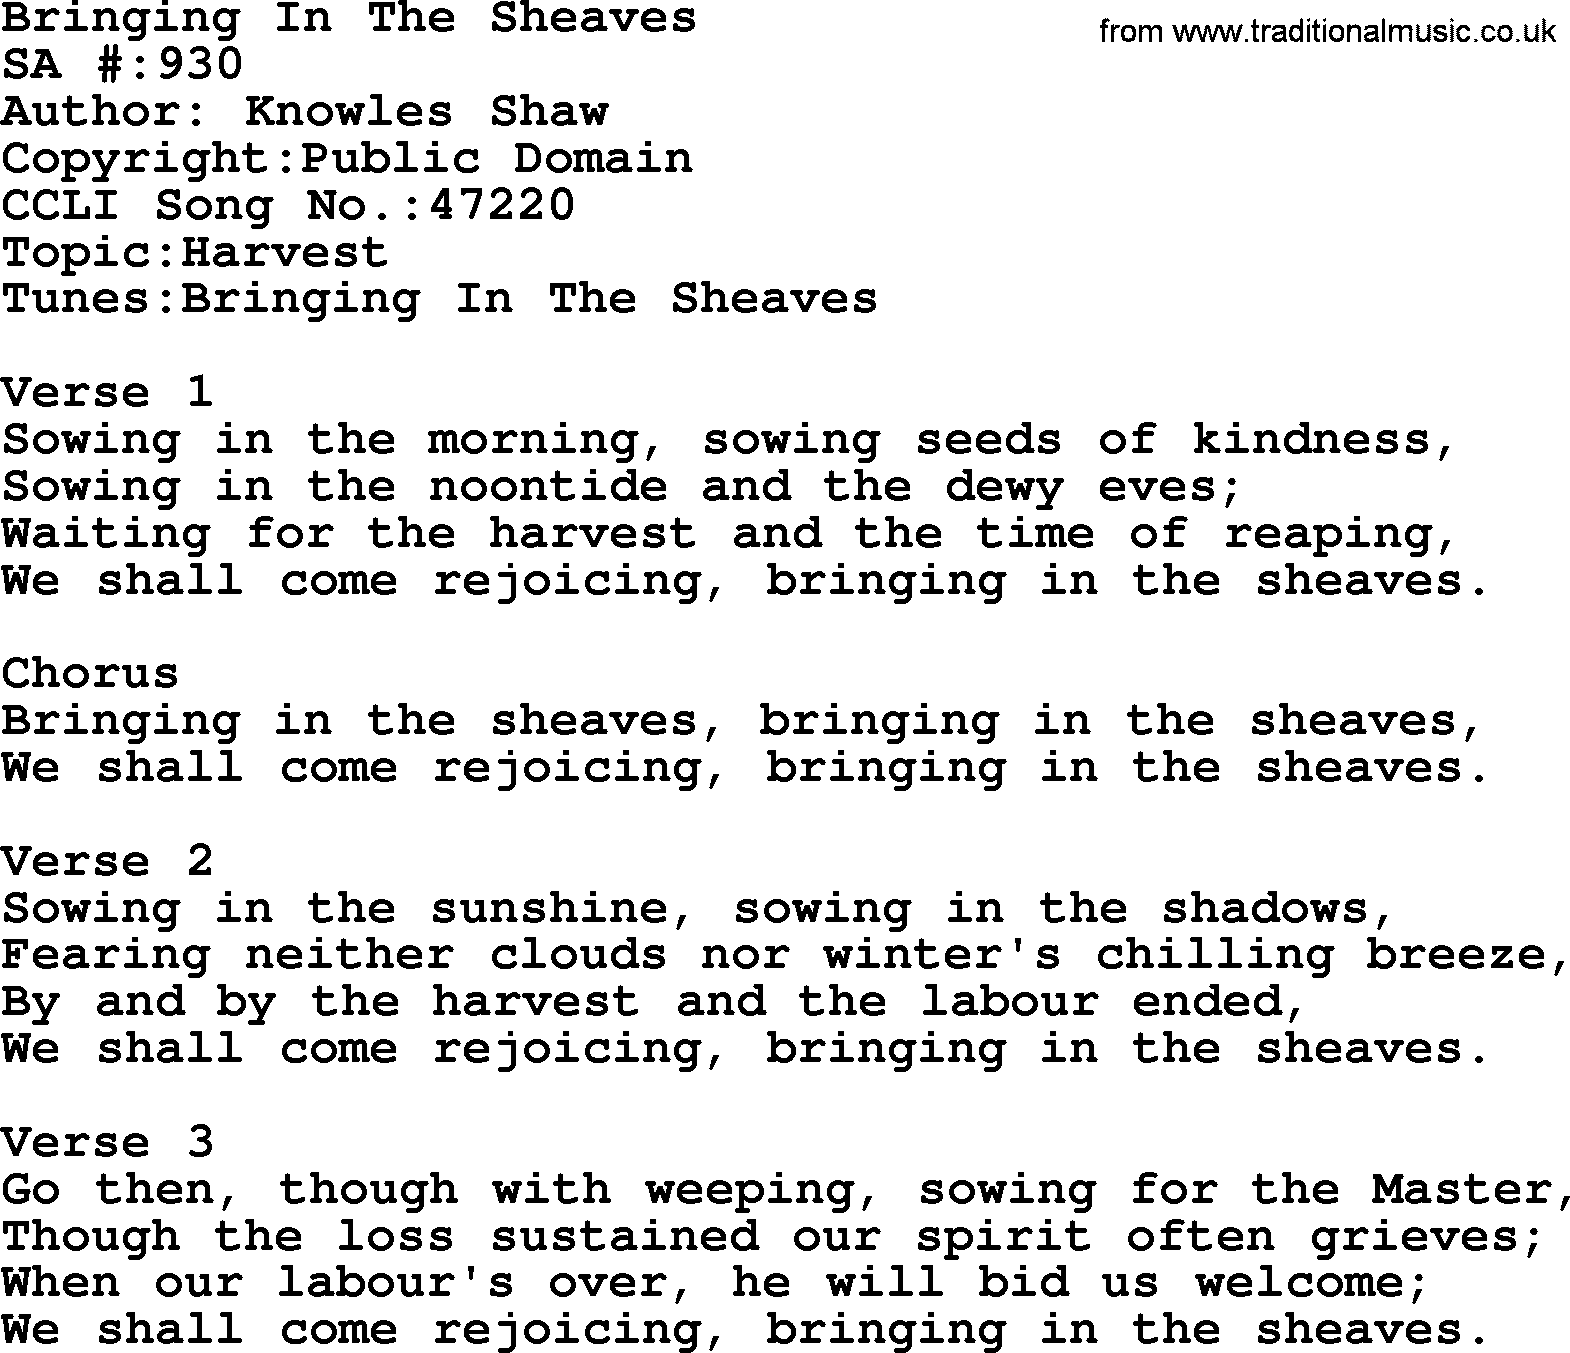 Salvation Army Hymnal, title: Bringing In The Sheaves, with lyrics and PDF,